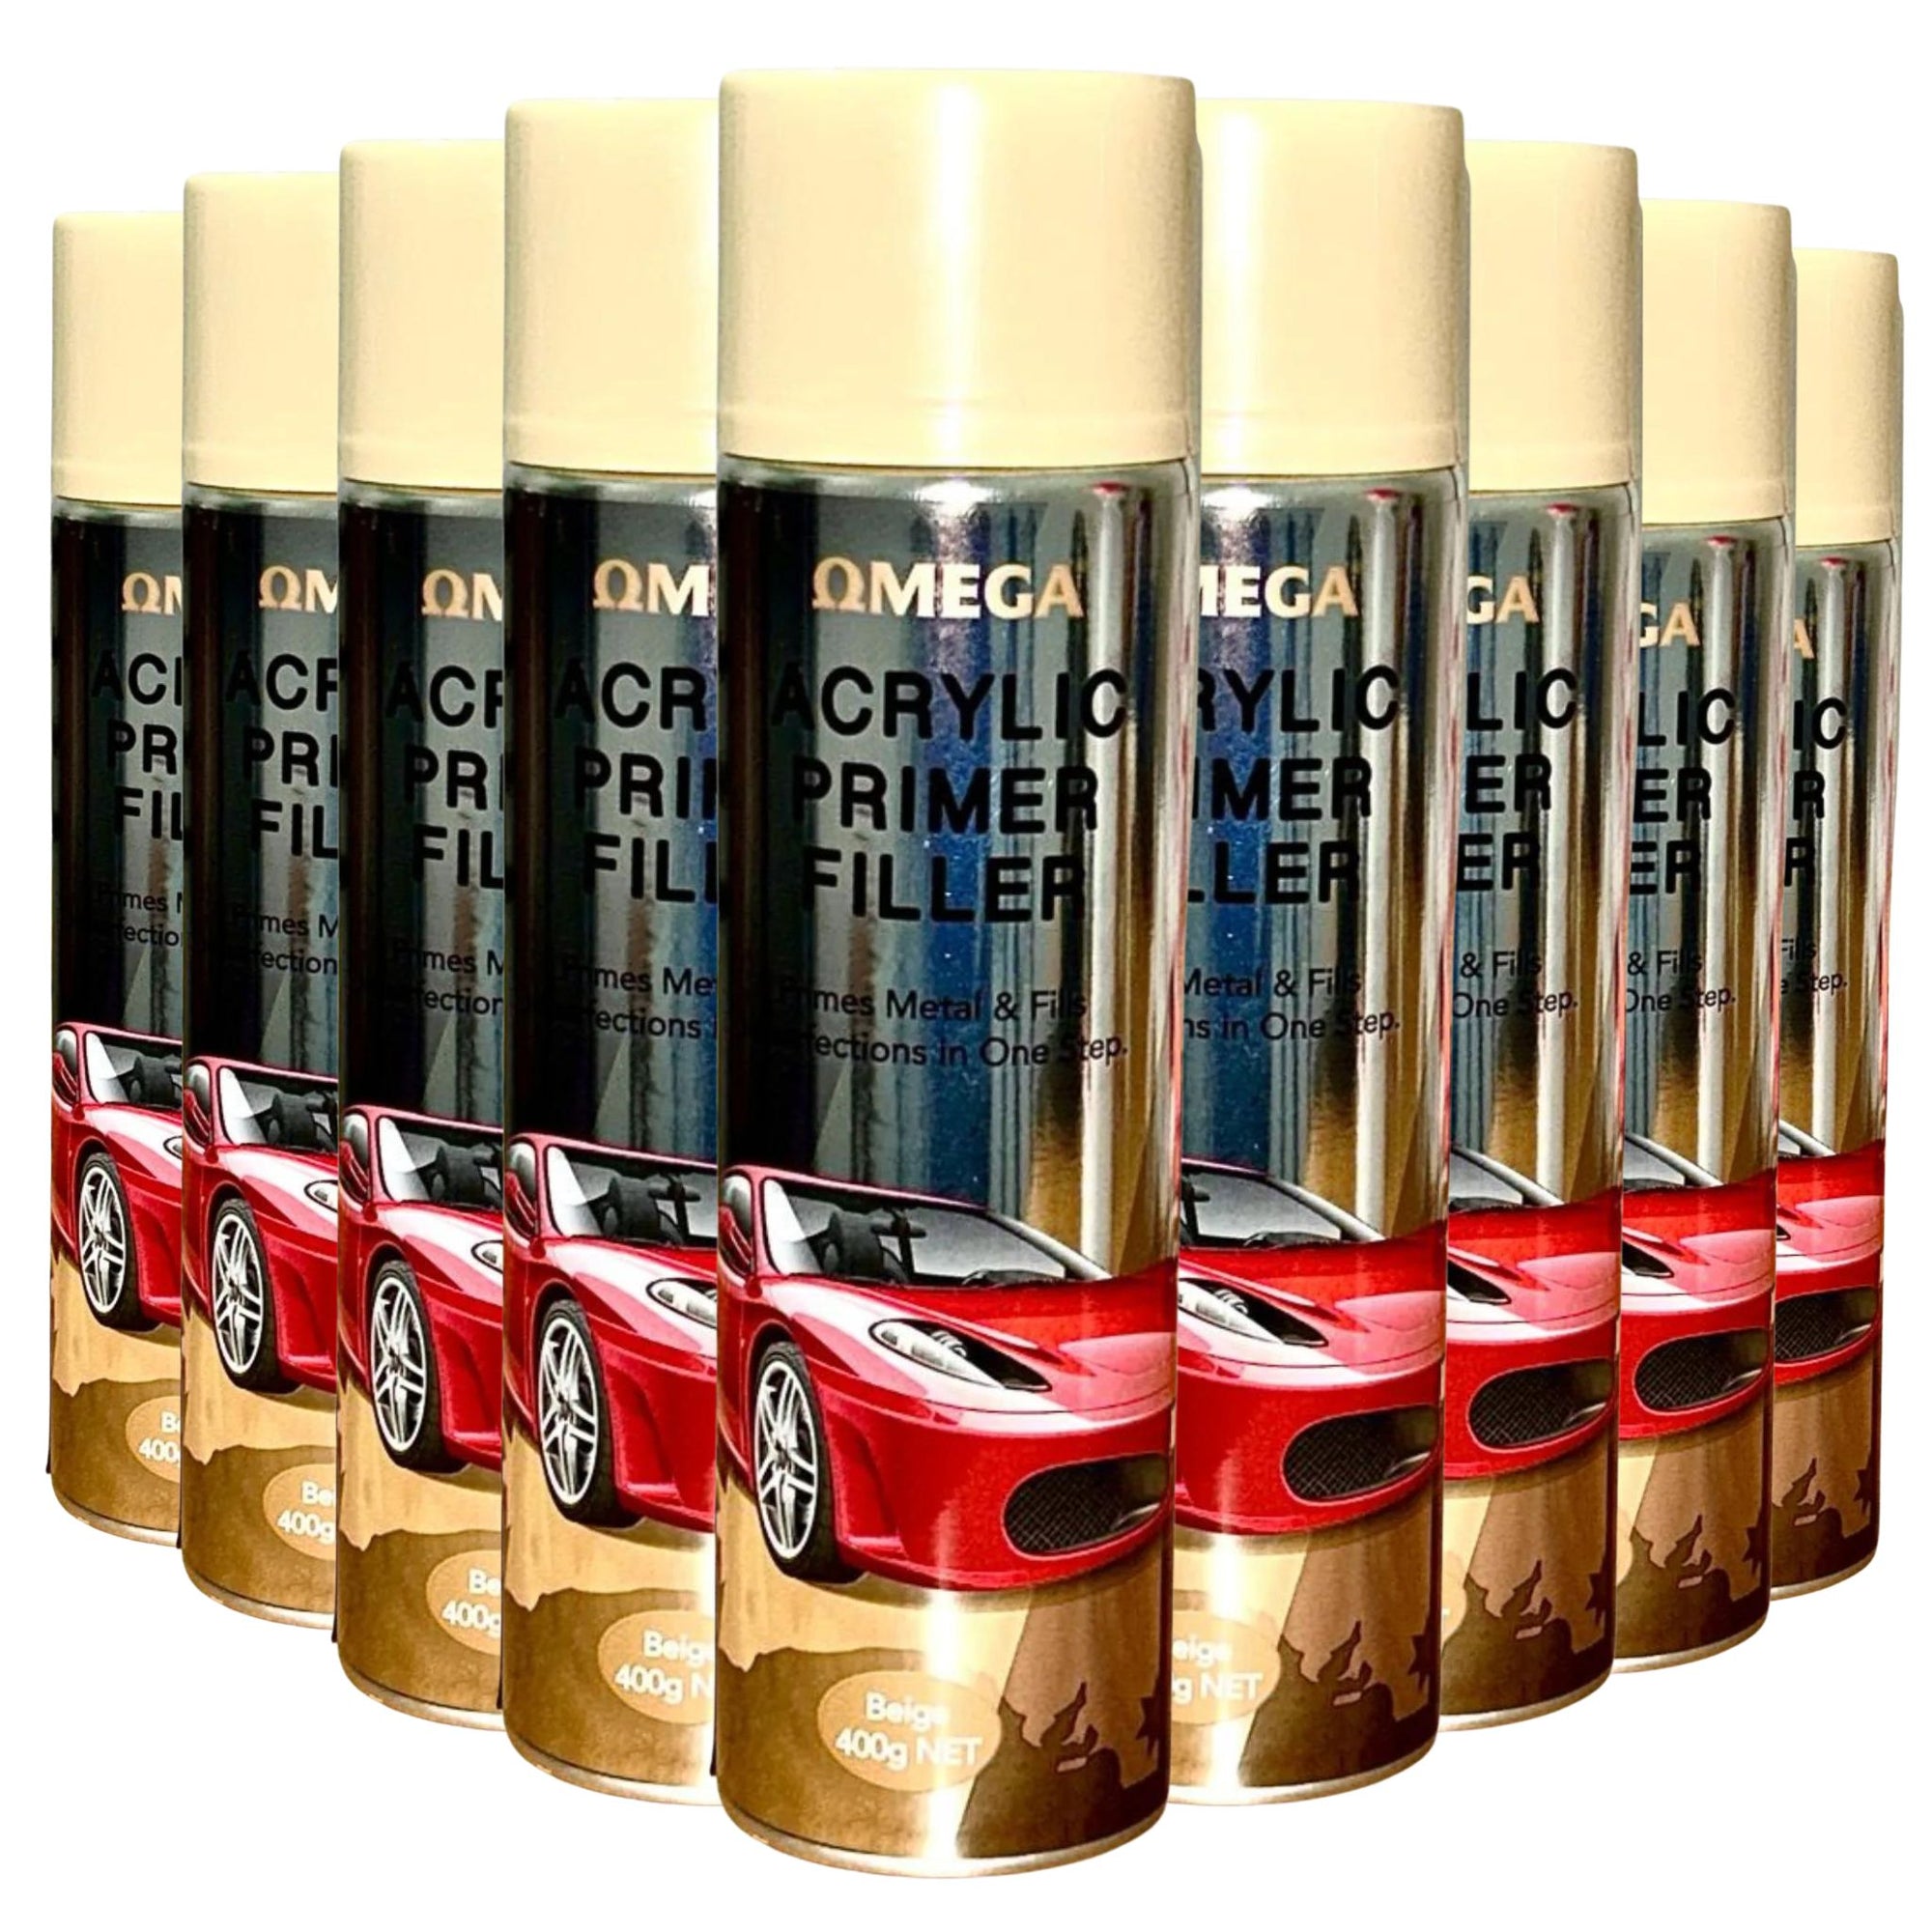 (12 CANS) Omega Acrylic Primer Filler - Beige 400g - South East Clearance Centre